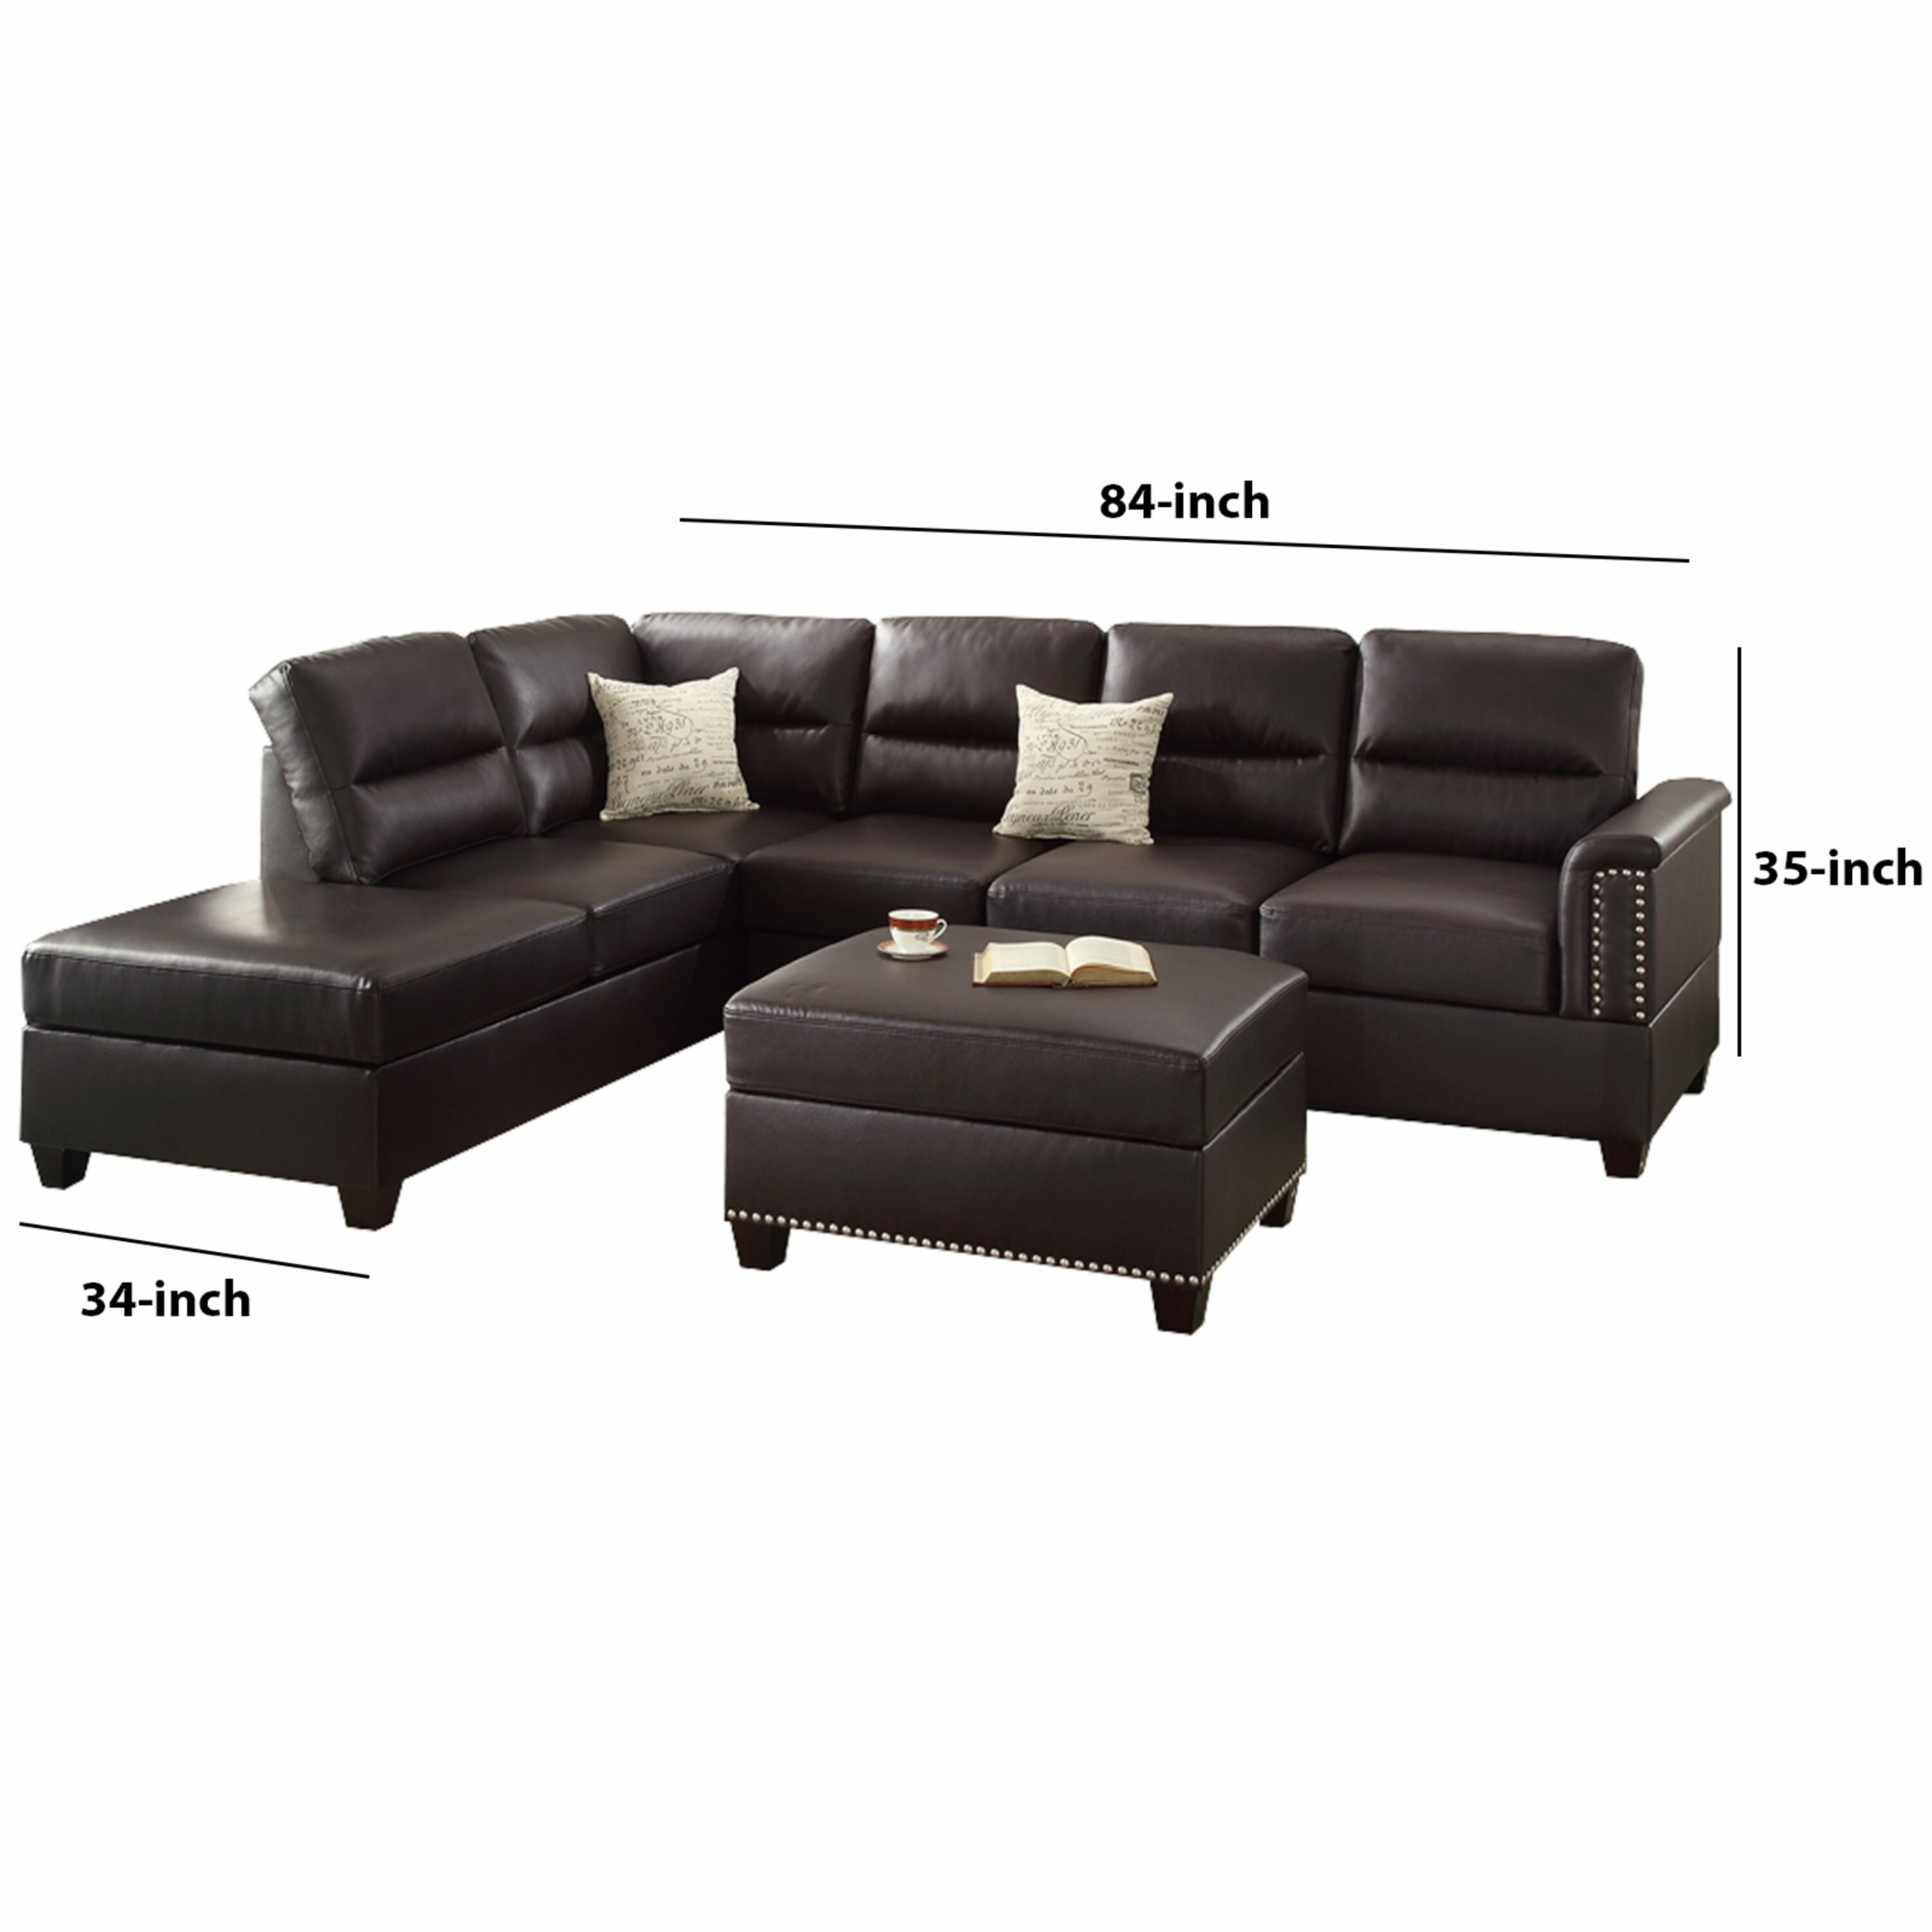 Destinations Sofa 3 Seat Find The Perfect Style Havertys